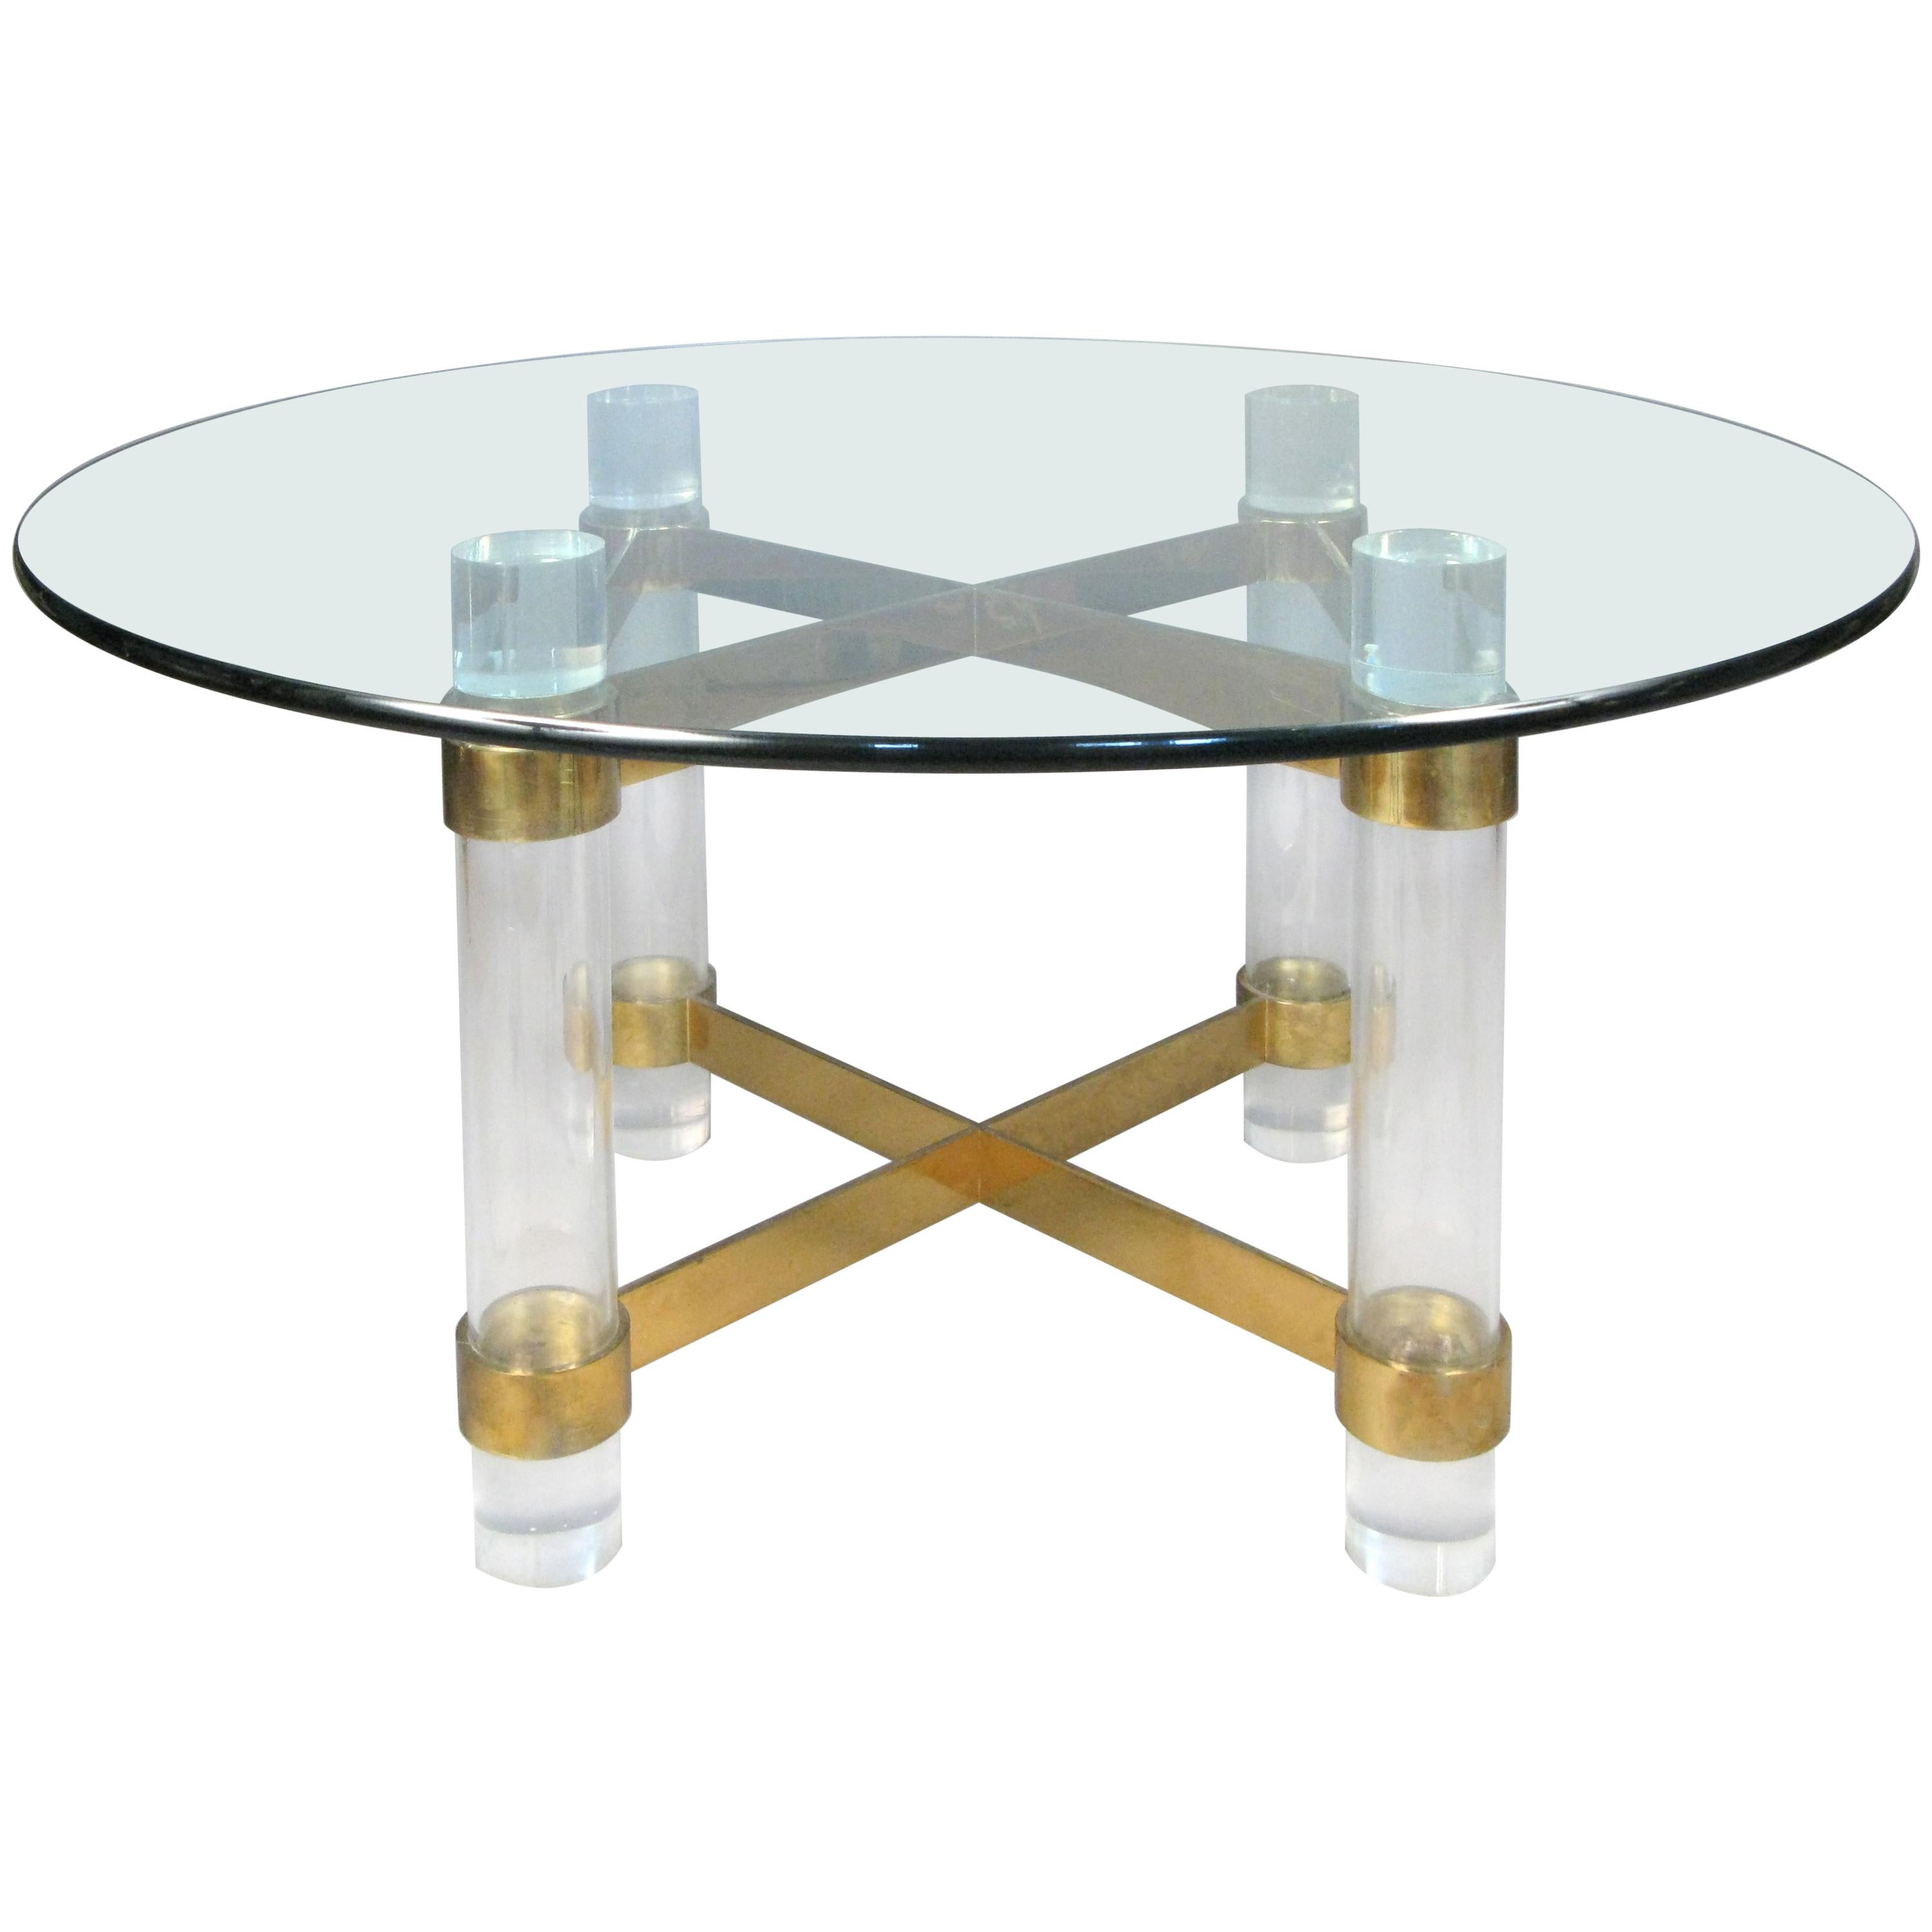 1970s Lucite and brass dining table by Charles Hollis Jones.